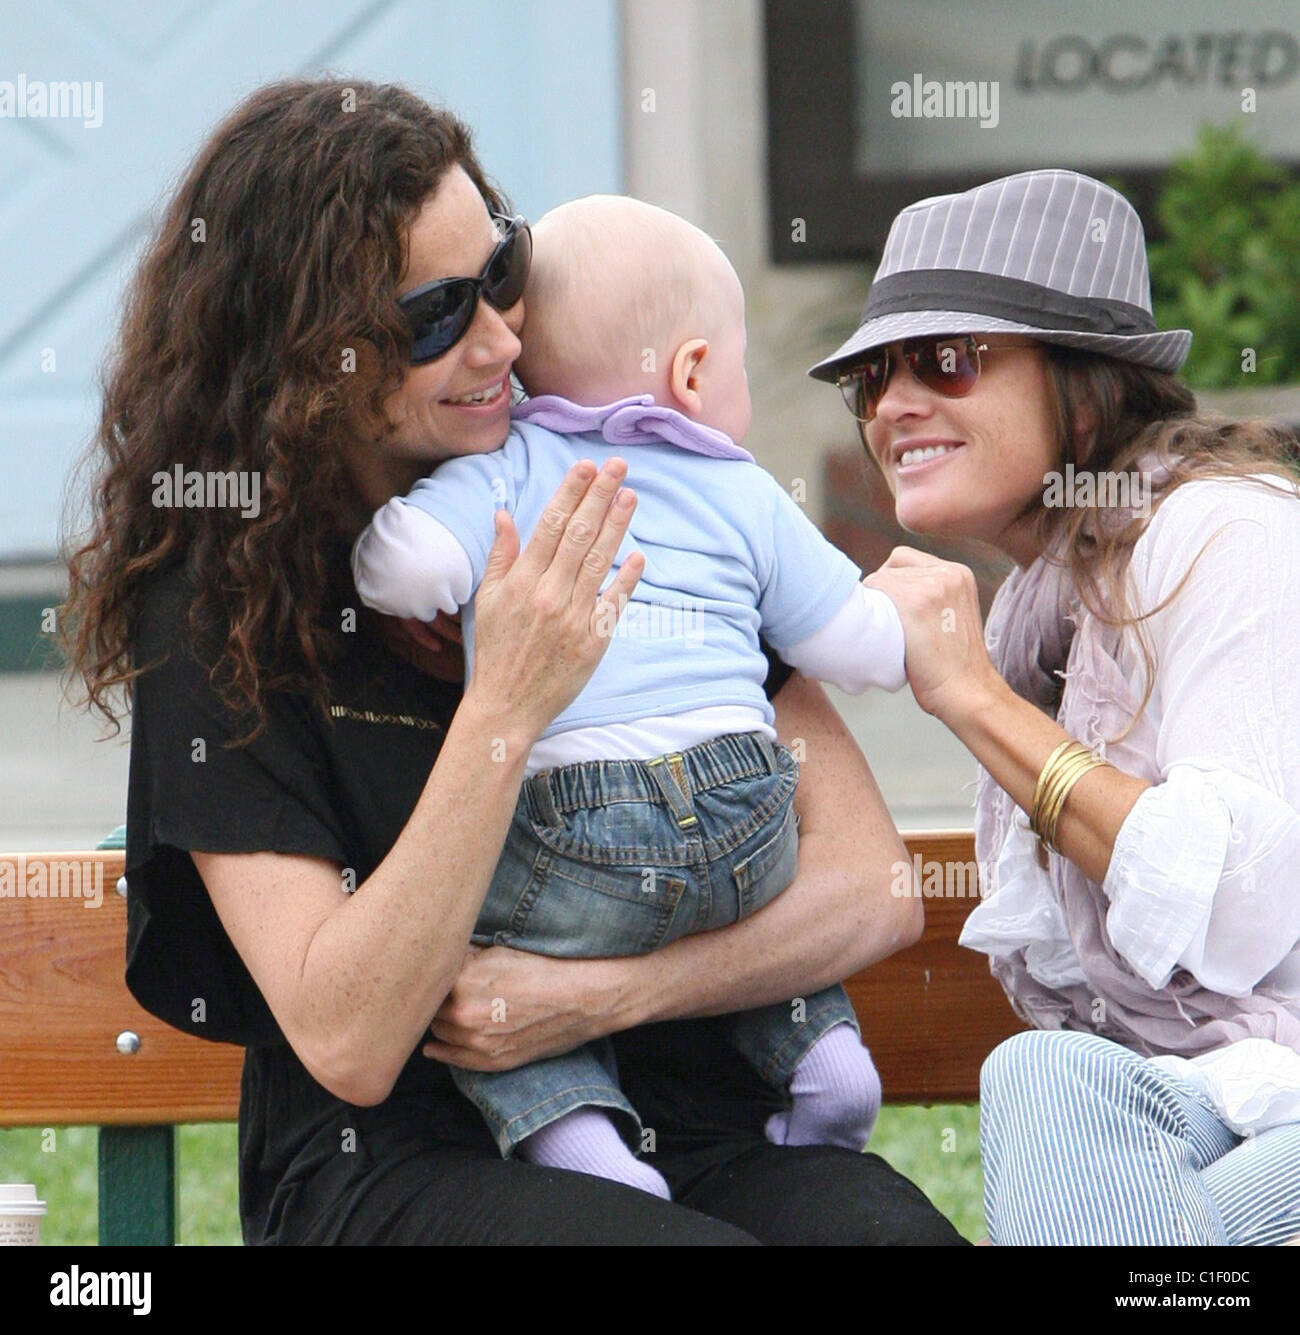 Minnie Driver takes her son baby Henry to Malibu Park on Mother's Day. Los Angeles, California, USA - 10.05.09 Stock Photo